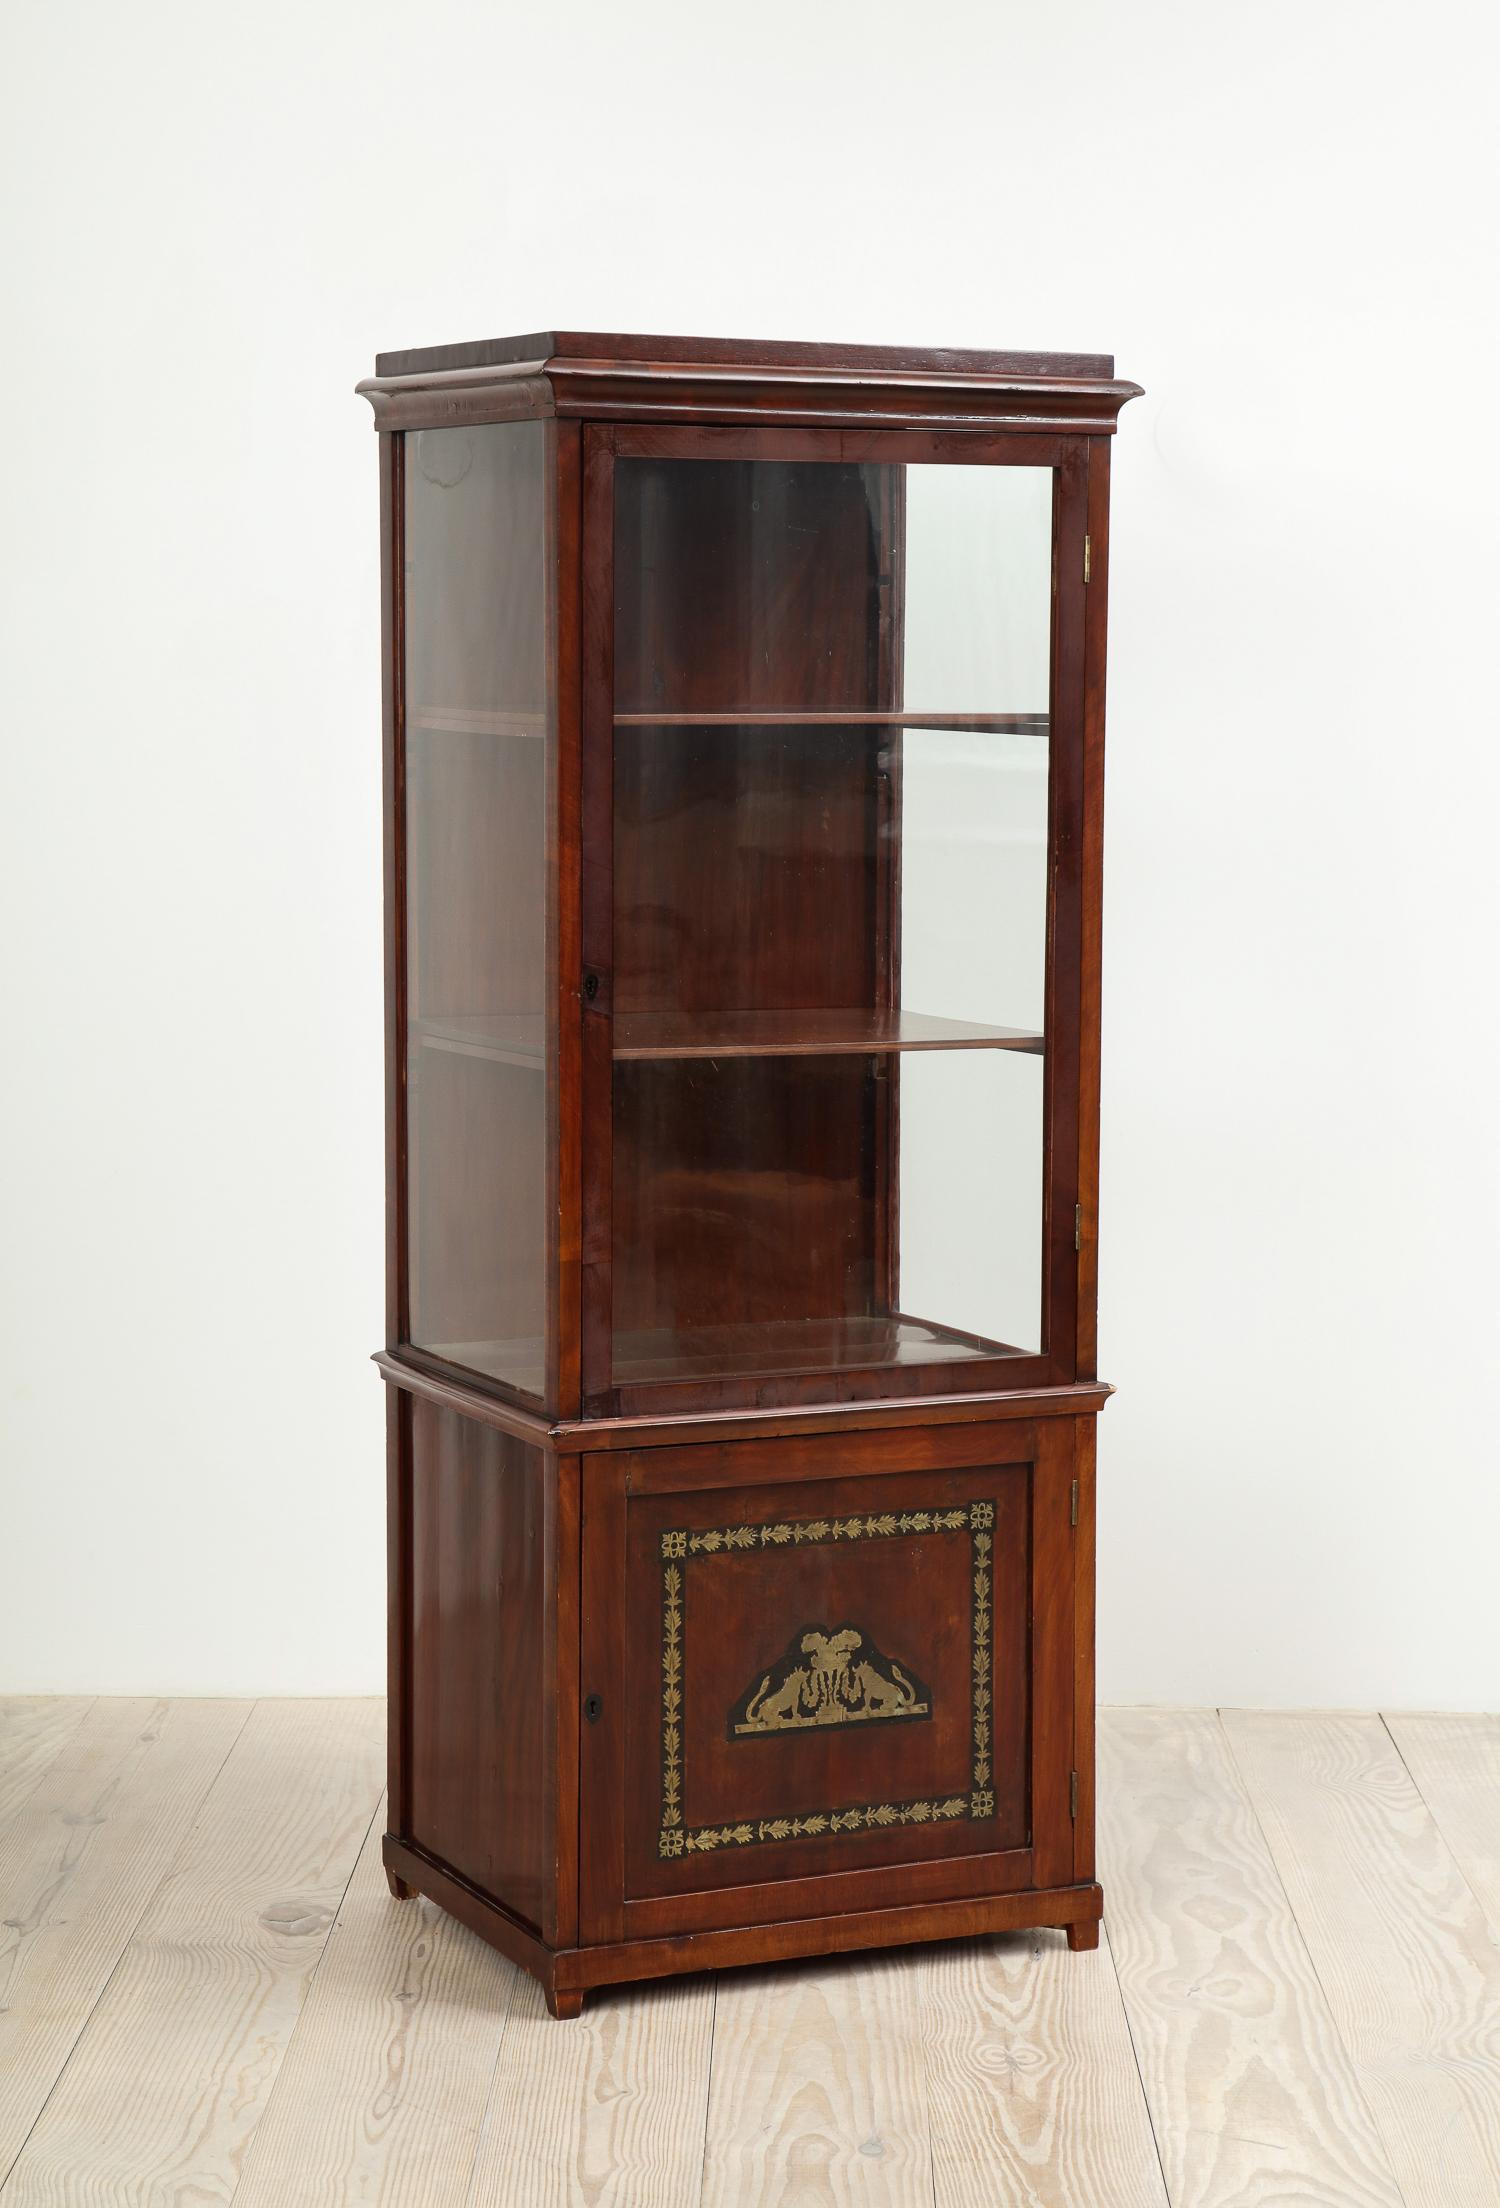 Russian neoclassical mahogany cabinet with brass inlay, circa 1820.

Upper cabinet fitted with glass sides and front glass door with three shelves; bottom section single door cabinet.
 